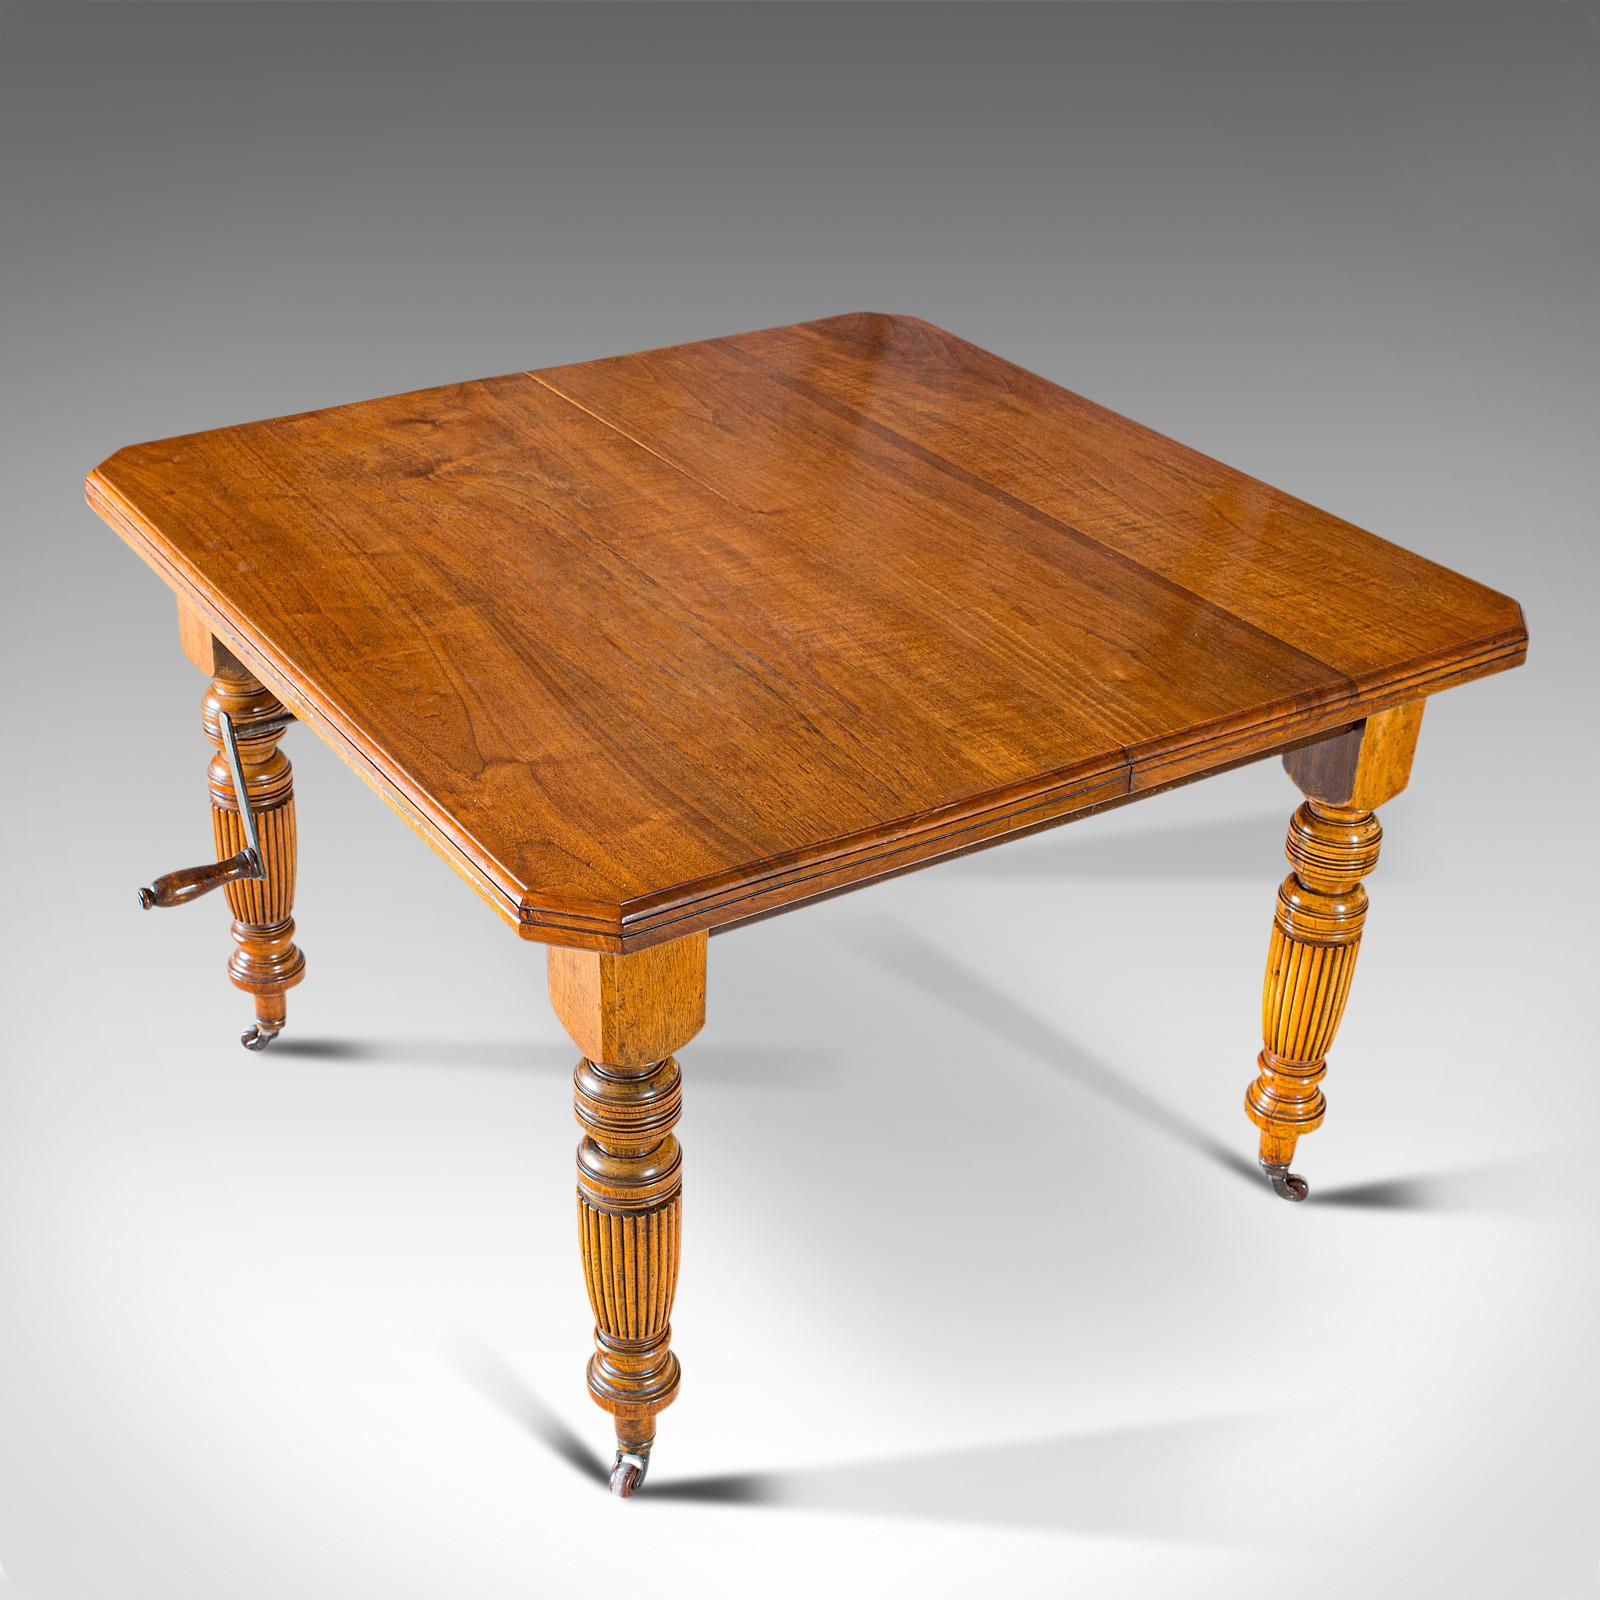 Antique Extending Dining Table, English, Walnut, Seats 4-6, Victorian, 1890 3